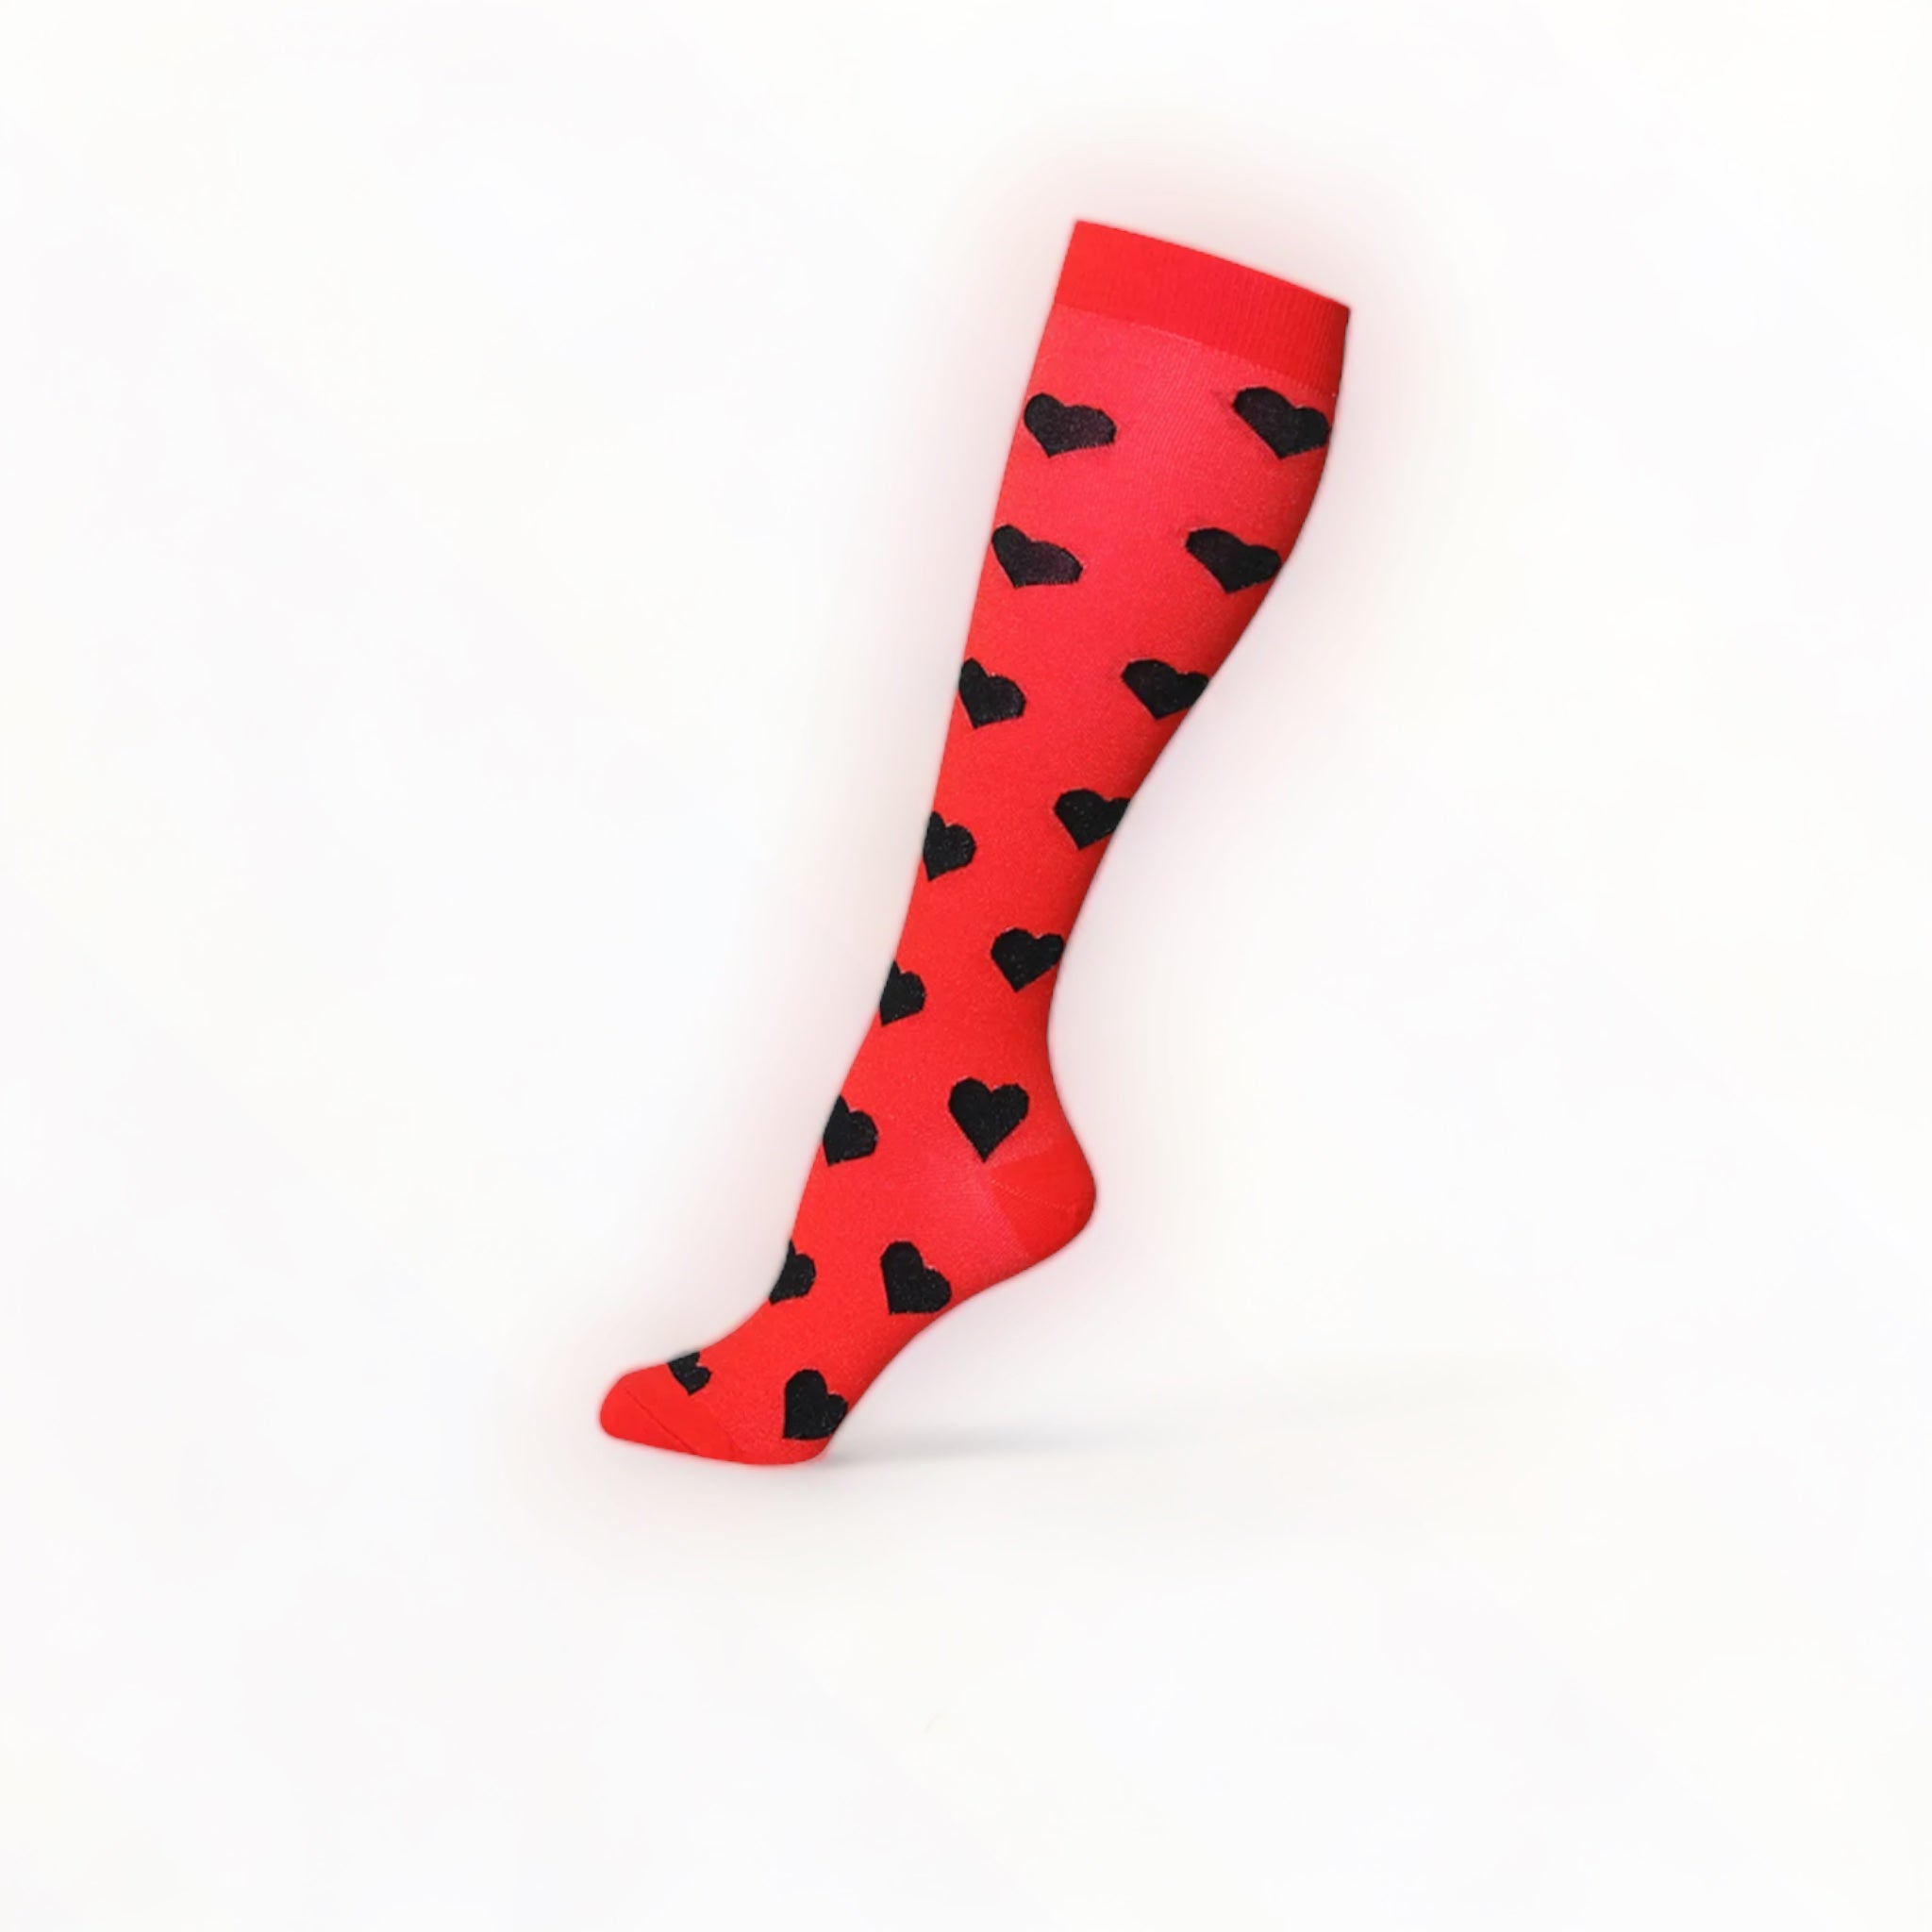 Support stocking red with black hearts